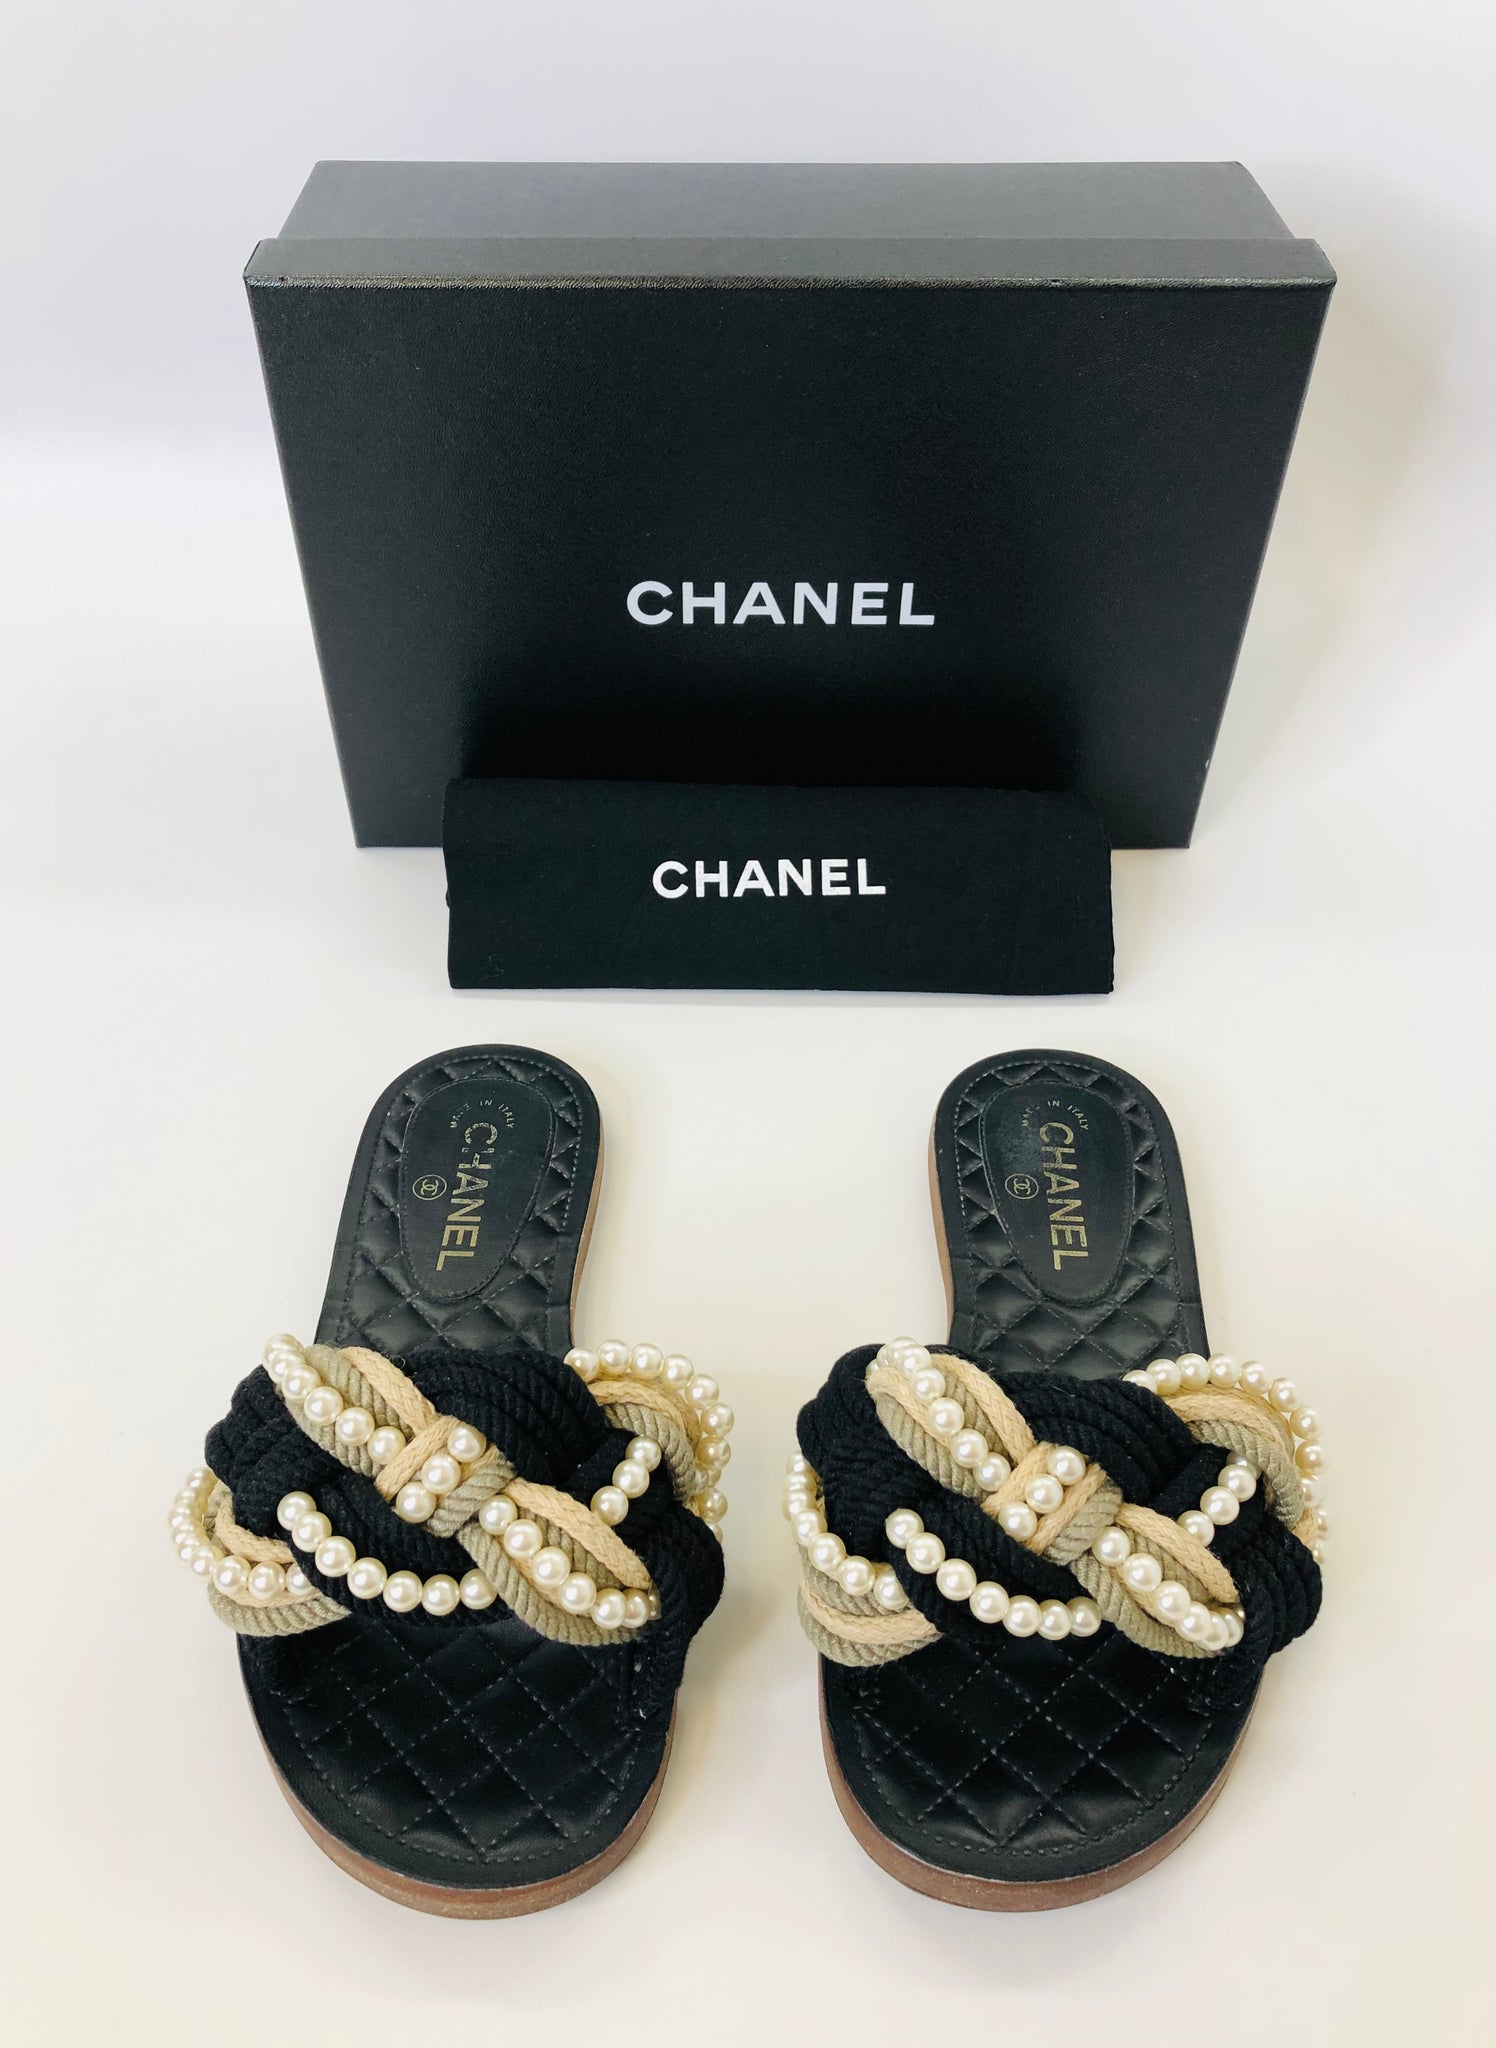 CHANEL Paris Cuba Cruise 2016/17 Runway Pearl and Rope Slides Size 38 –  JDEX Styles